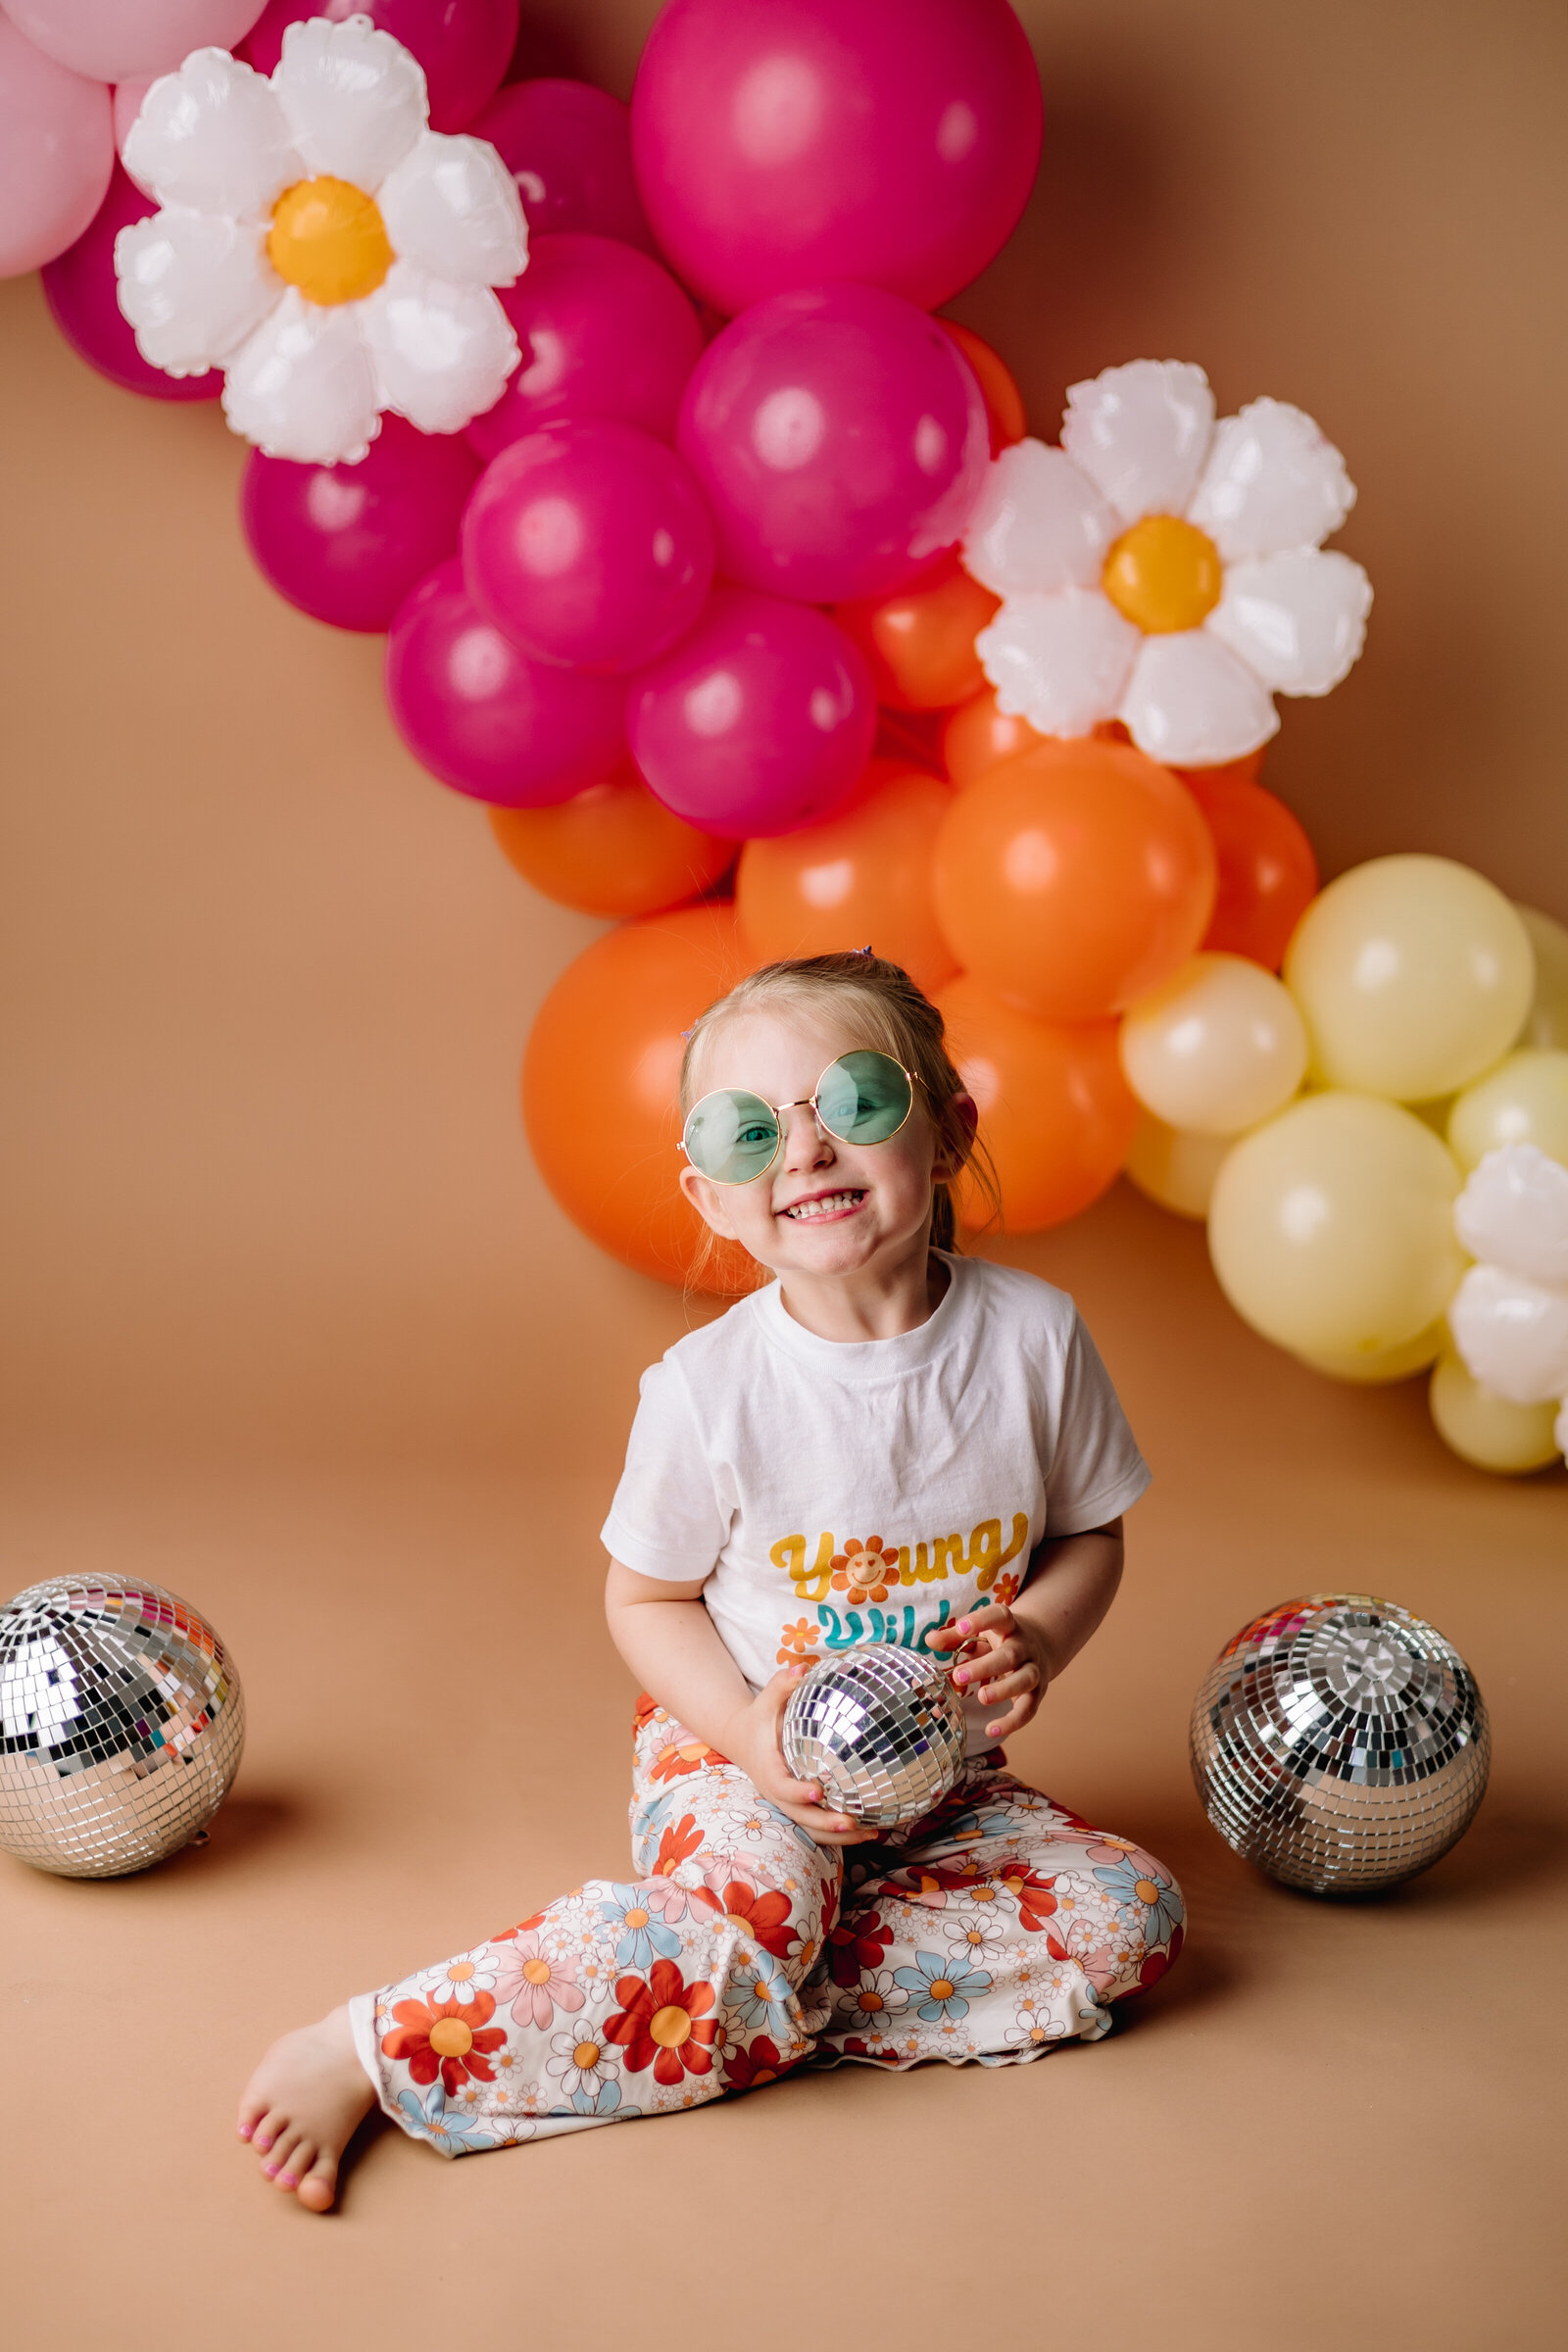 Sweet little girl with round sunglasses, smiles joyfully at the camera surrounded by balloons and disco balls